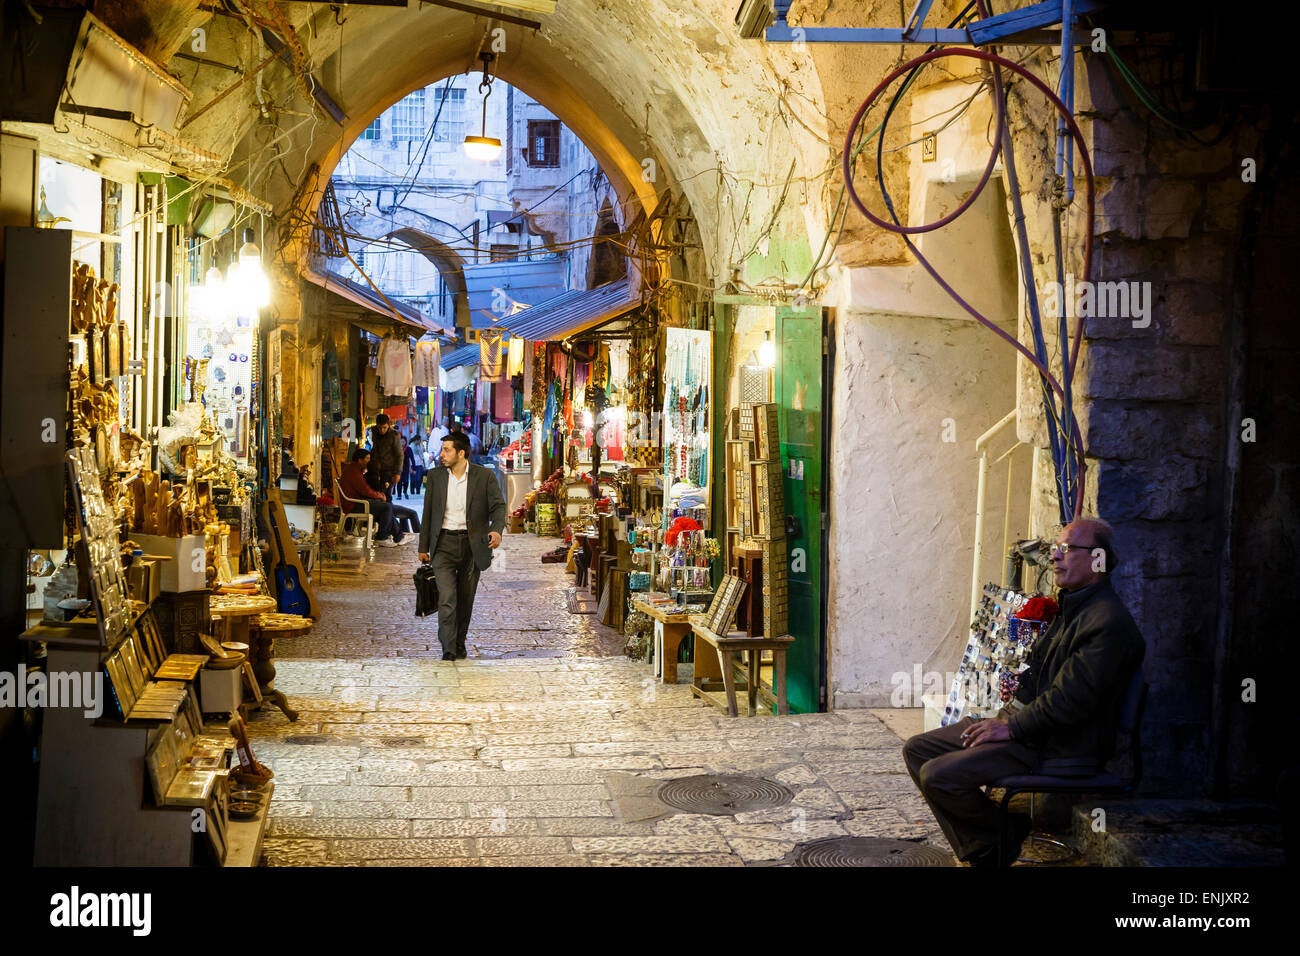 Street with shops in the Muslim Quarter of the Old City, UNESCO World Heritage Site, Jerusalem, Israel, Middle East Stock Photo